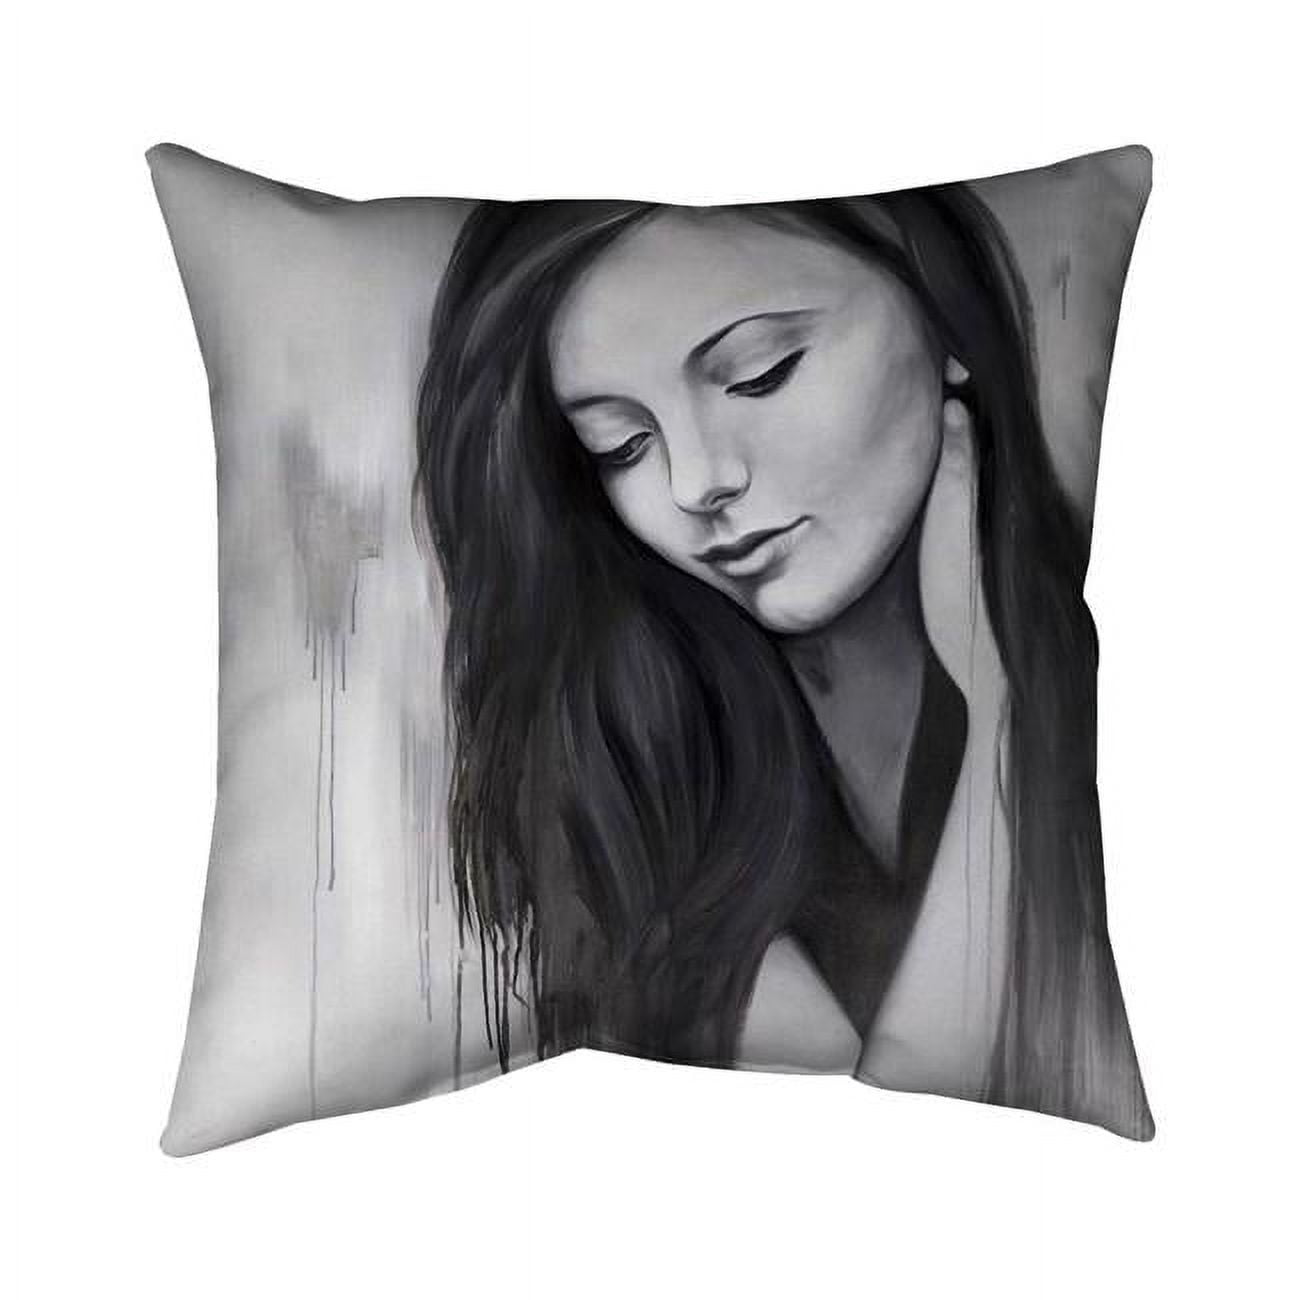 Begin Home Decor 5543-2626-FI30 26 x 26 in. Realistic Woman Portrait-Double Sided Print Indoor Pillow Cover